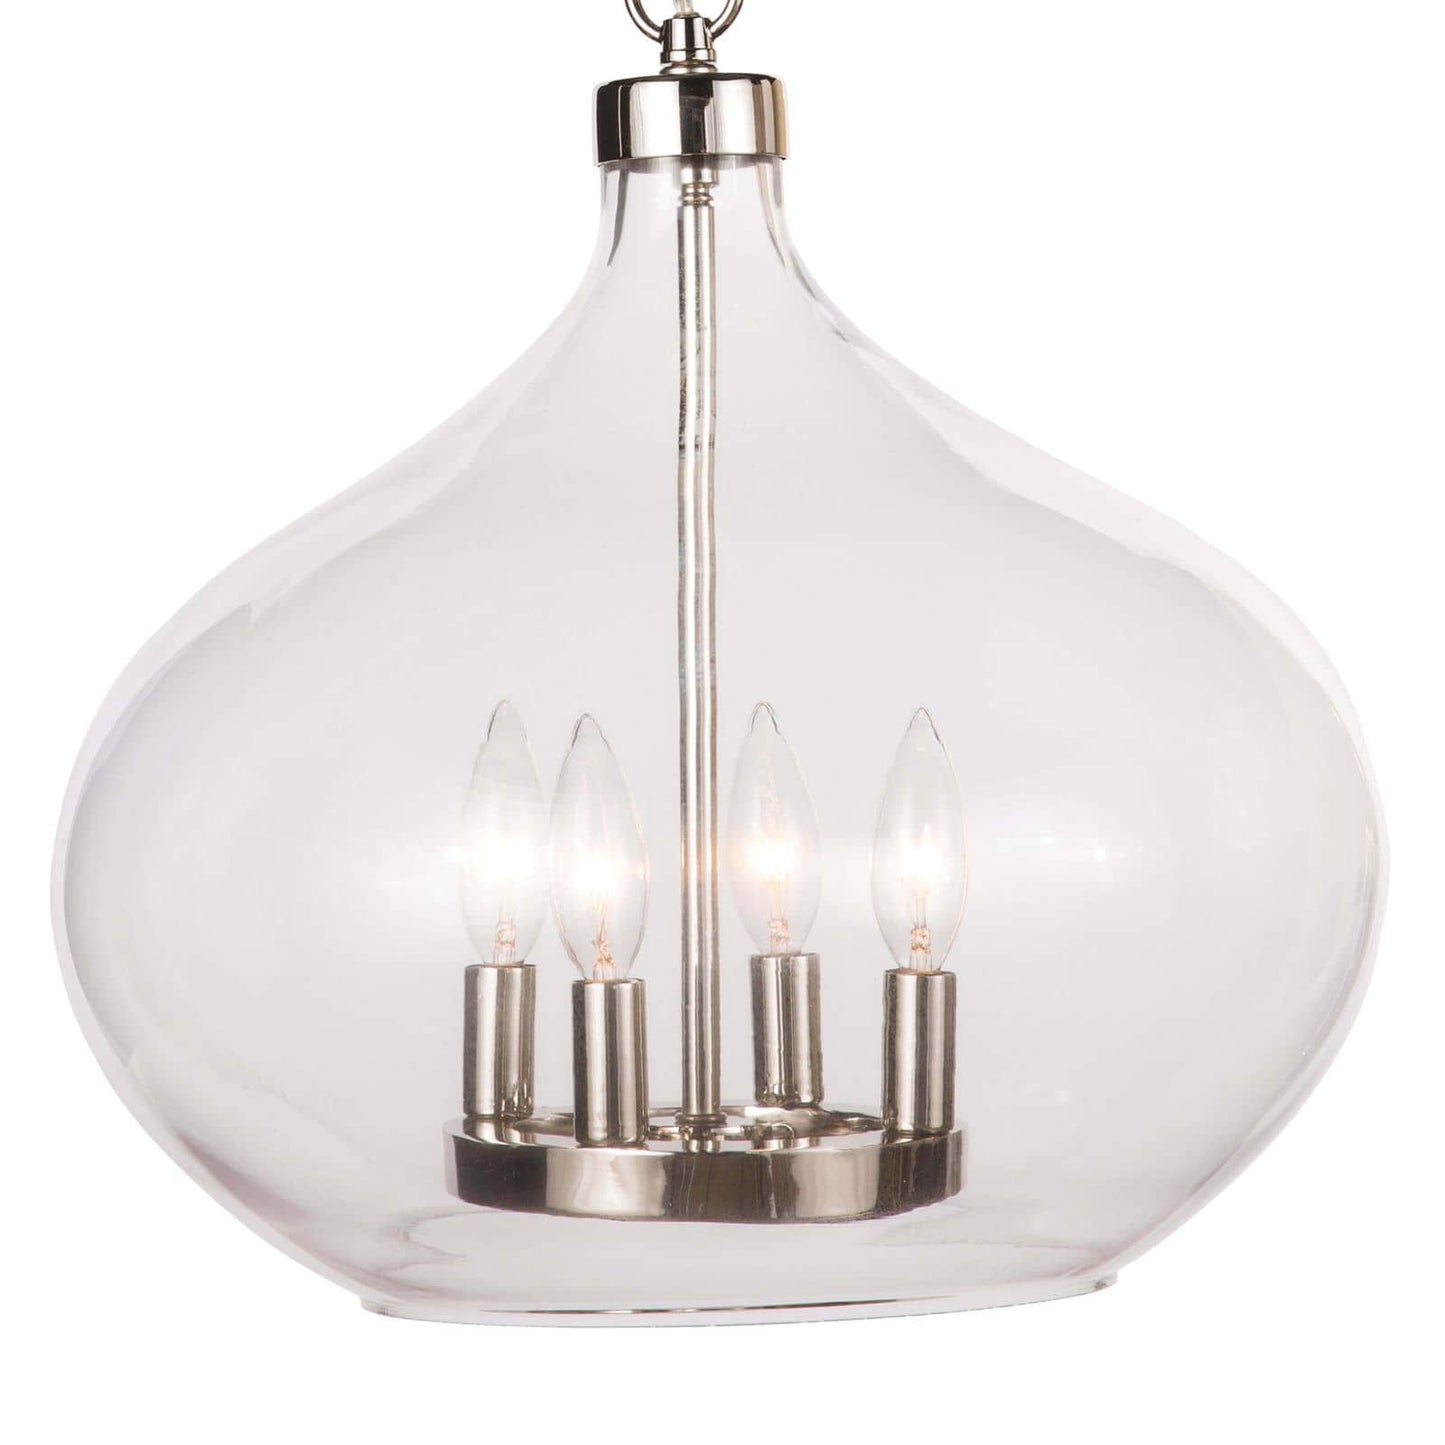 Dover Pendant in Polished Nickel by Coastal Living